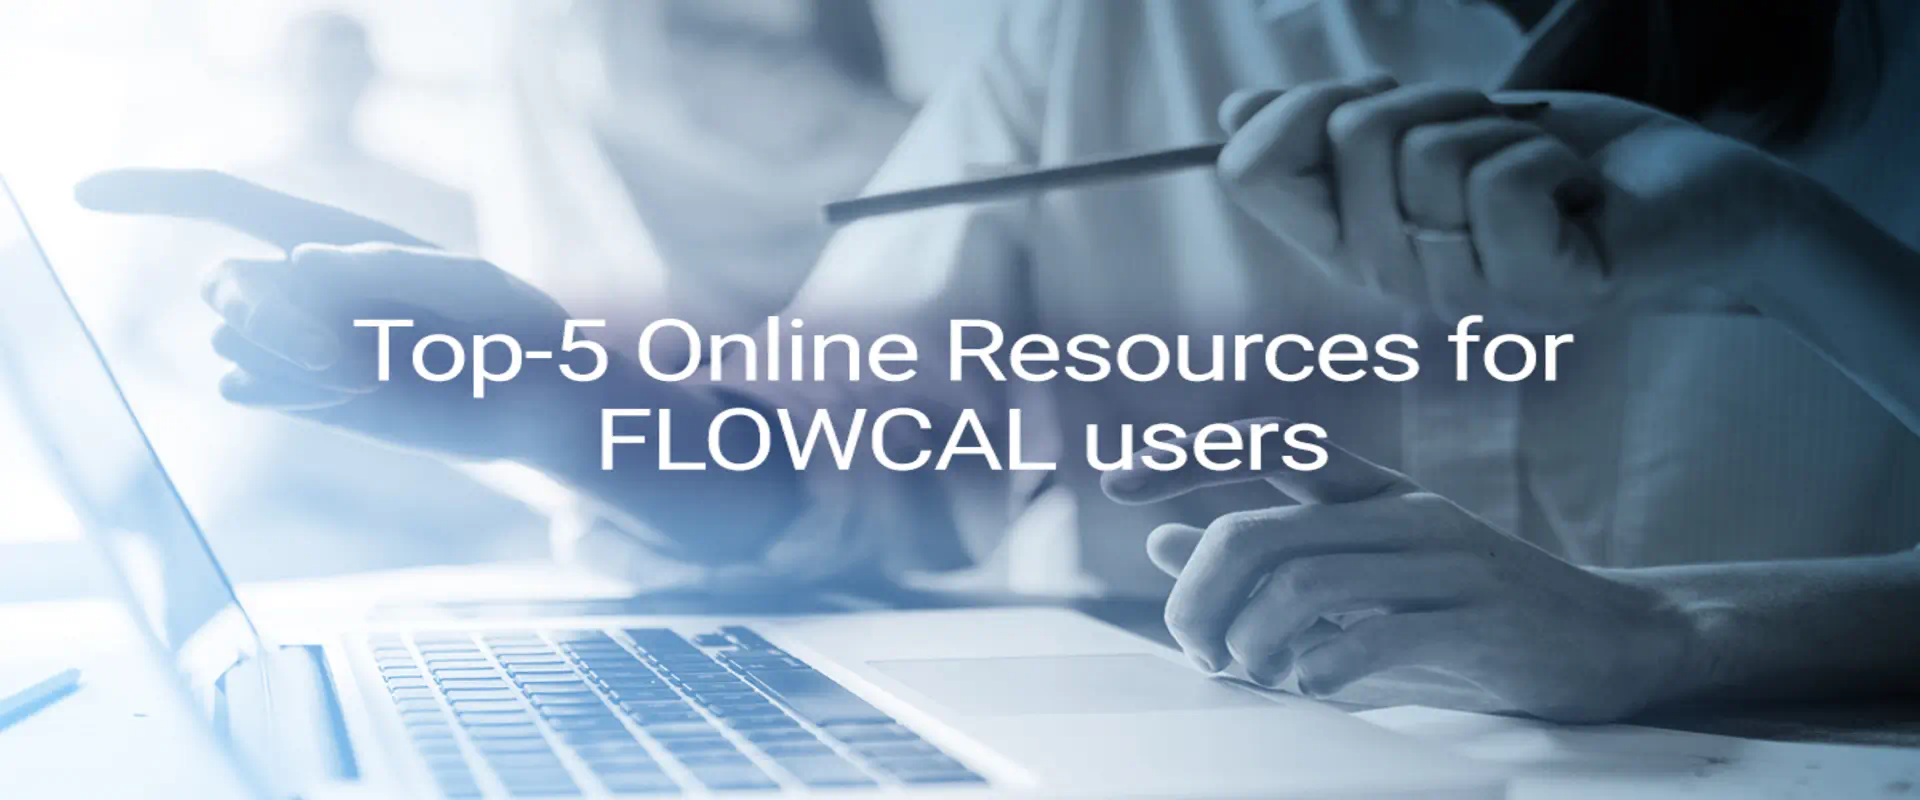 Top 5 Online Resources For Flowcal Users - Quorum Measurement